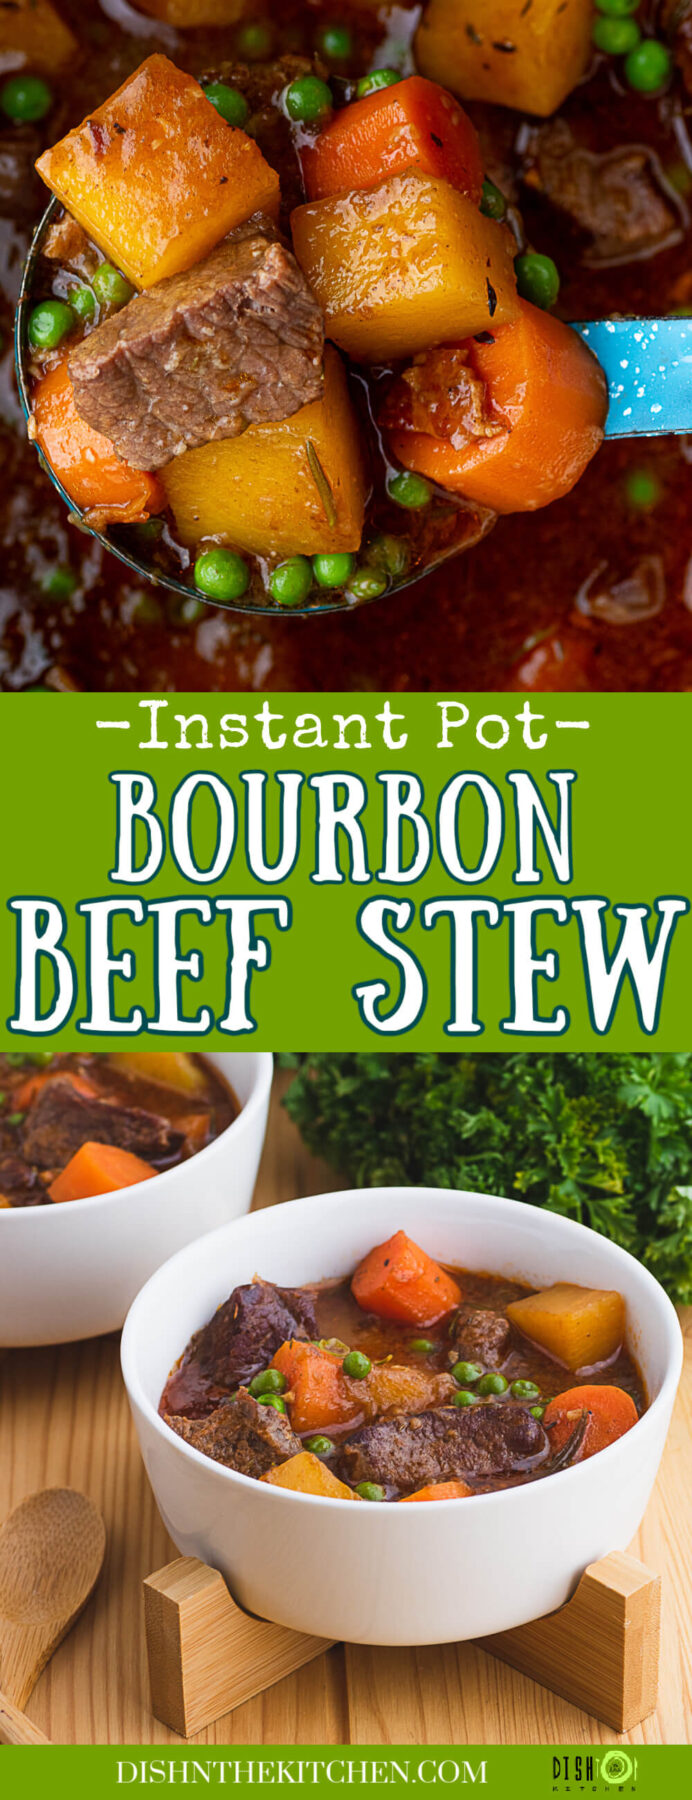 Pinterest image featuring a blue ladle full of beef stew and two white bowls full of Instant Pot Beef Stew.